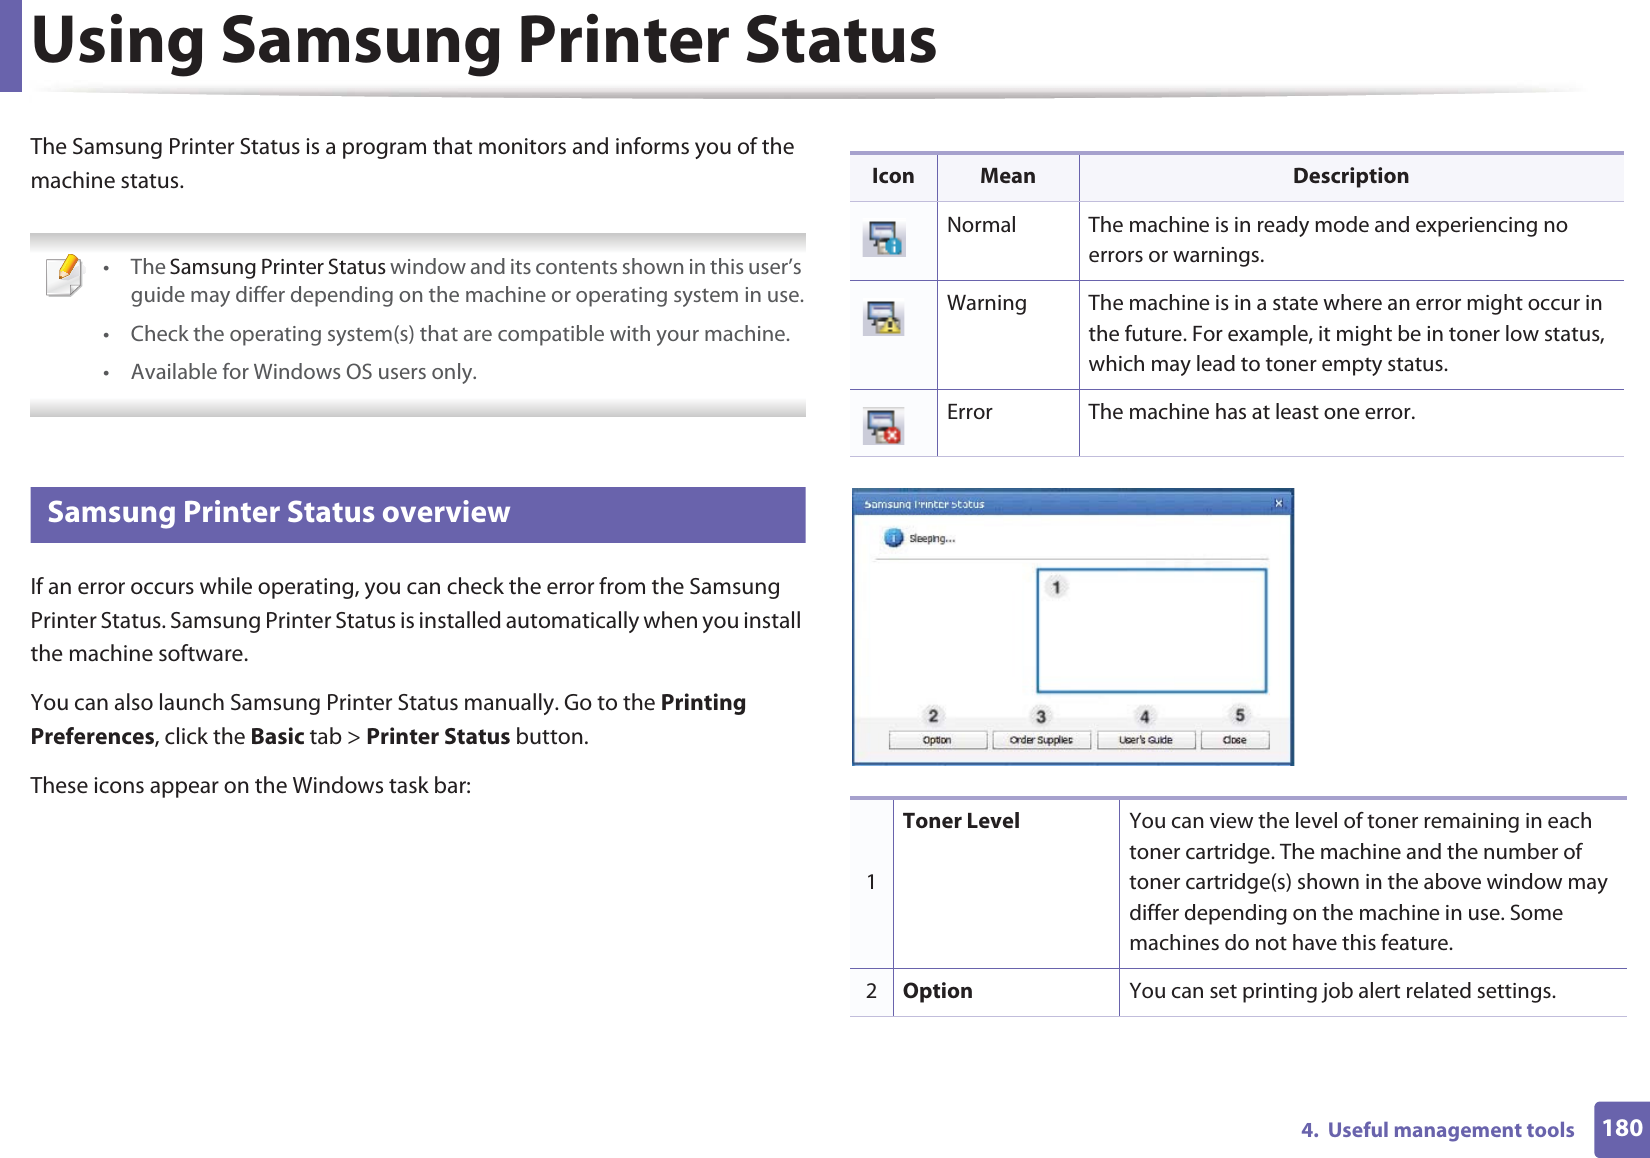 1804.  Useful management toolsUsing Samsung Printer Status The Samsung Printer Status is a program that monitors and informs you of the machine status.  • The Samsung Printer Status window and its contents shown in this user’s guide may differ depending on the machine or operating system in use.• Check the operating system(s) that are compatible with your machine.• Available for Windows OS users only. 6 Samsung Printer Status overviewIf an error occurs while operating, you can check the error from the Samsung Printer Status. Samsung Printer Status is installed automatically when you install the machine software. You can also launch Samsung Printer Status manually. Go to the Printing Preferences, click the Basic tab &gt; Printer Status button.These icons appear on the Windows task bar:Icon Mean DescriptionNormal The machine is in ready mode and experiencing no errors or warnings.Warning The machine is in a state where an error might occur in the future. For example, it might be in toner low status, which may lead to toner empty status. Error The machine has at least one error.1Toner Level You can view the level of toner remaining in each toner cartridge. The machine and the number of toner cartridge(s) shown in the above window may differ depending on the machine in use. Some machines do not have this feature.2Option You can set printing job alert related settings. 